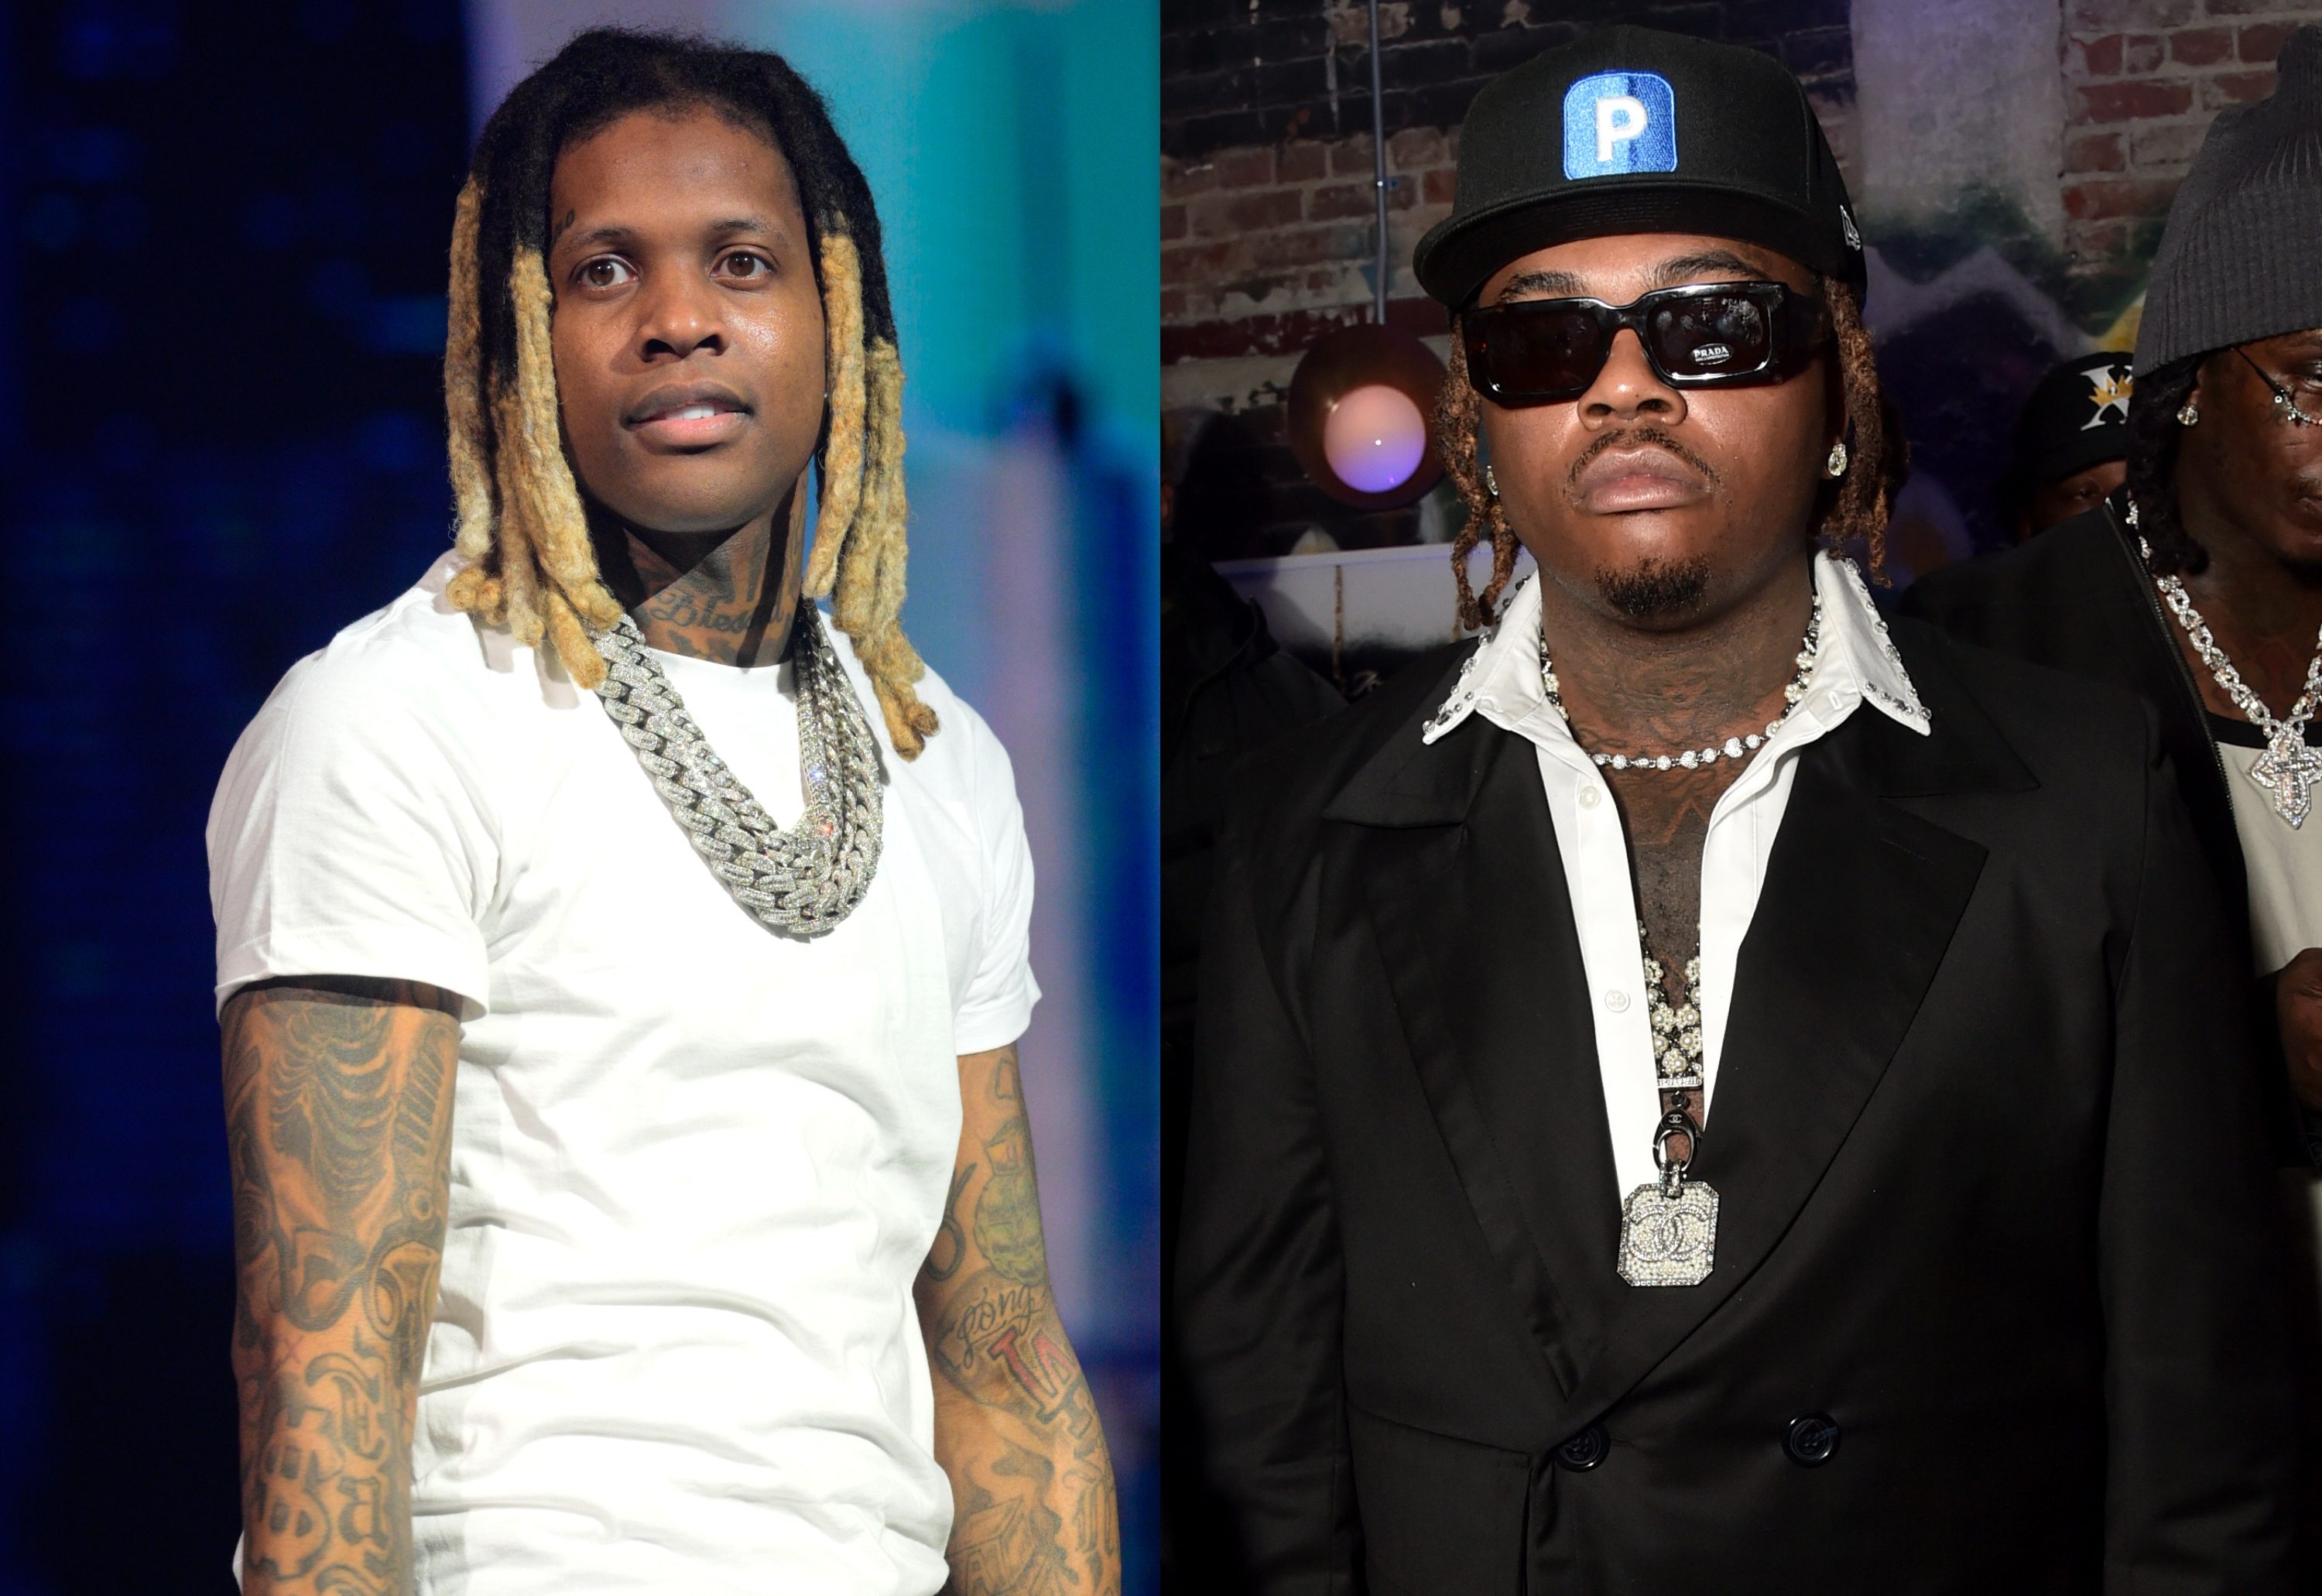 Lil Durk Accuses Gunna Of Snitching In YSL RICO Trial: “That Man Told”